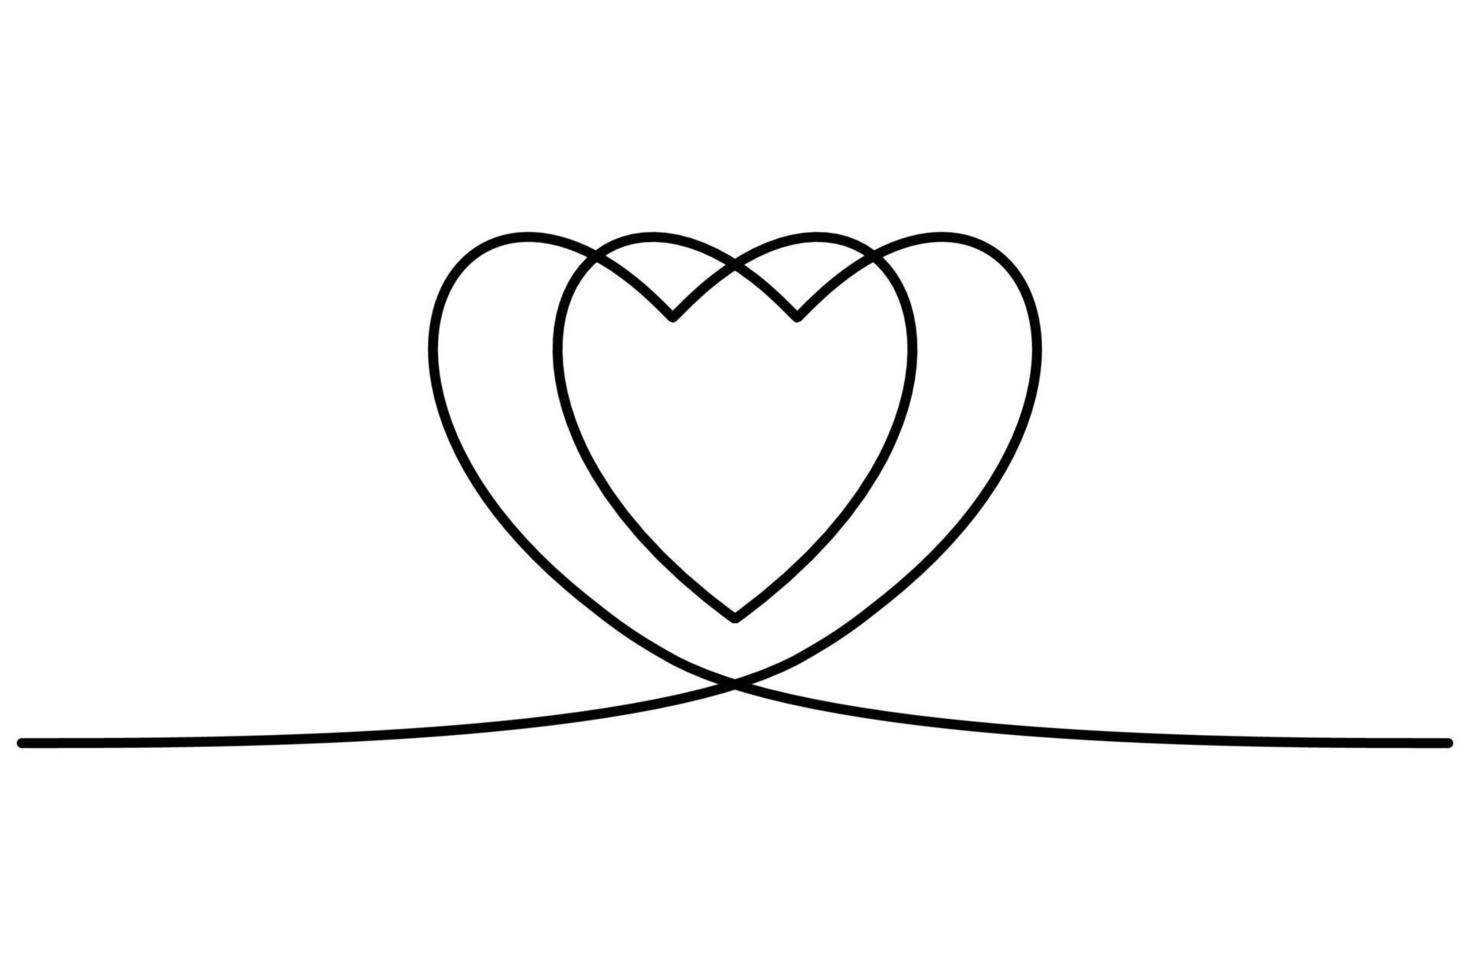 Continuous heart black line icon. Continuous line drawing love symbol on white background. Decoration element for valentine, wedding, invitation card. Vector illustration. Free Vector